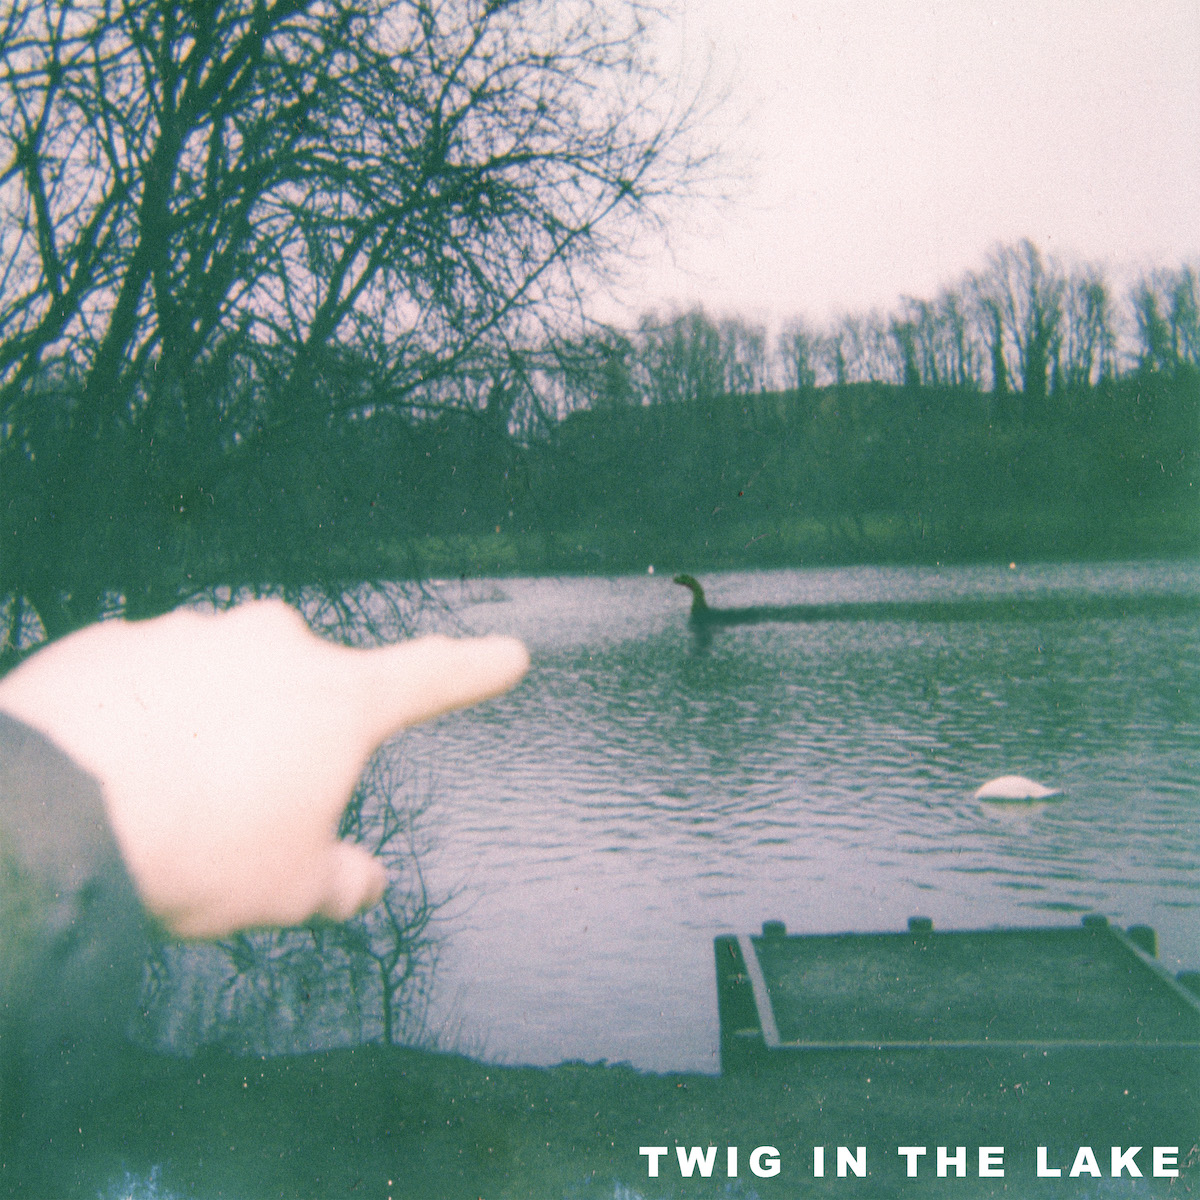 LISTEN: “Twig in the Lake” by The Rusty Nutz featuring Lionel Fanthorpe